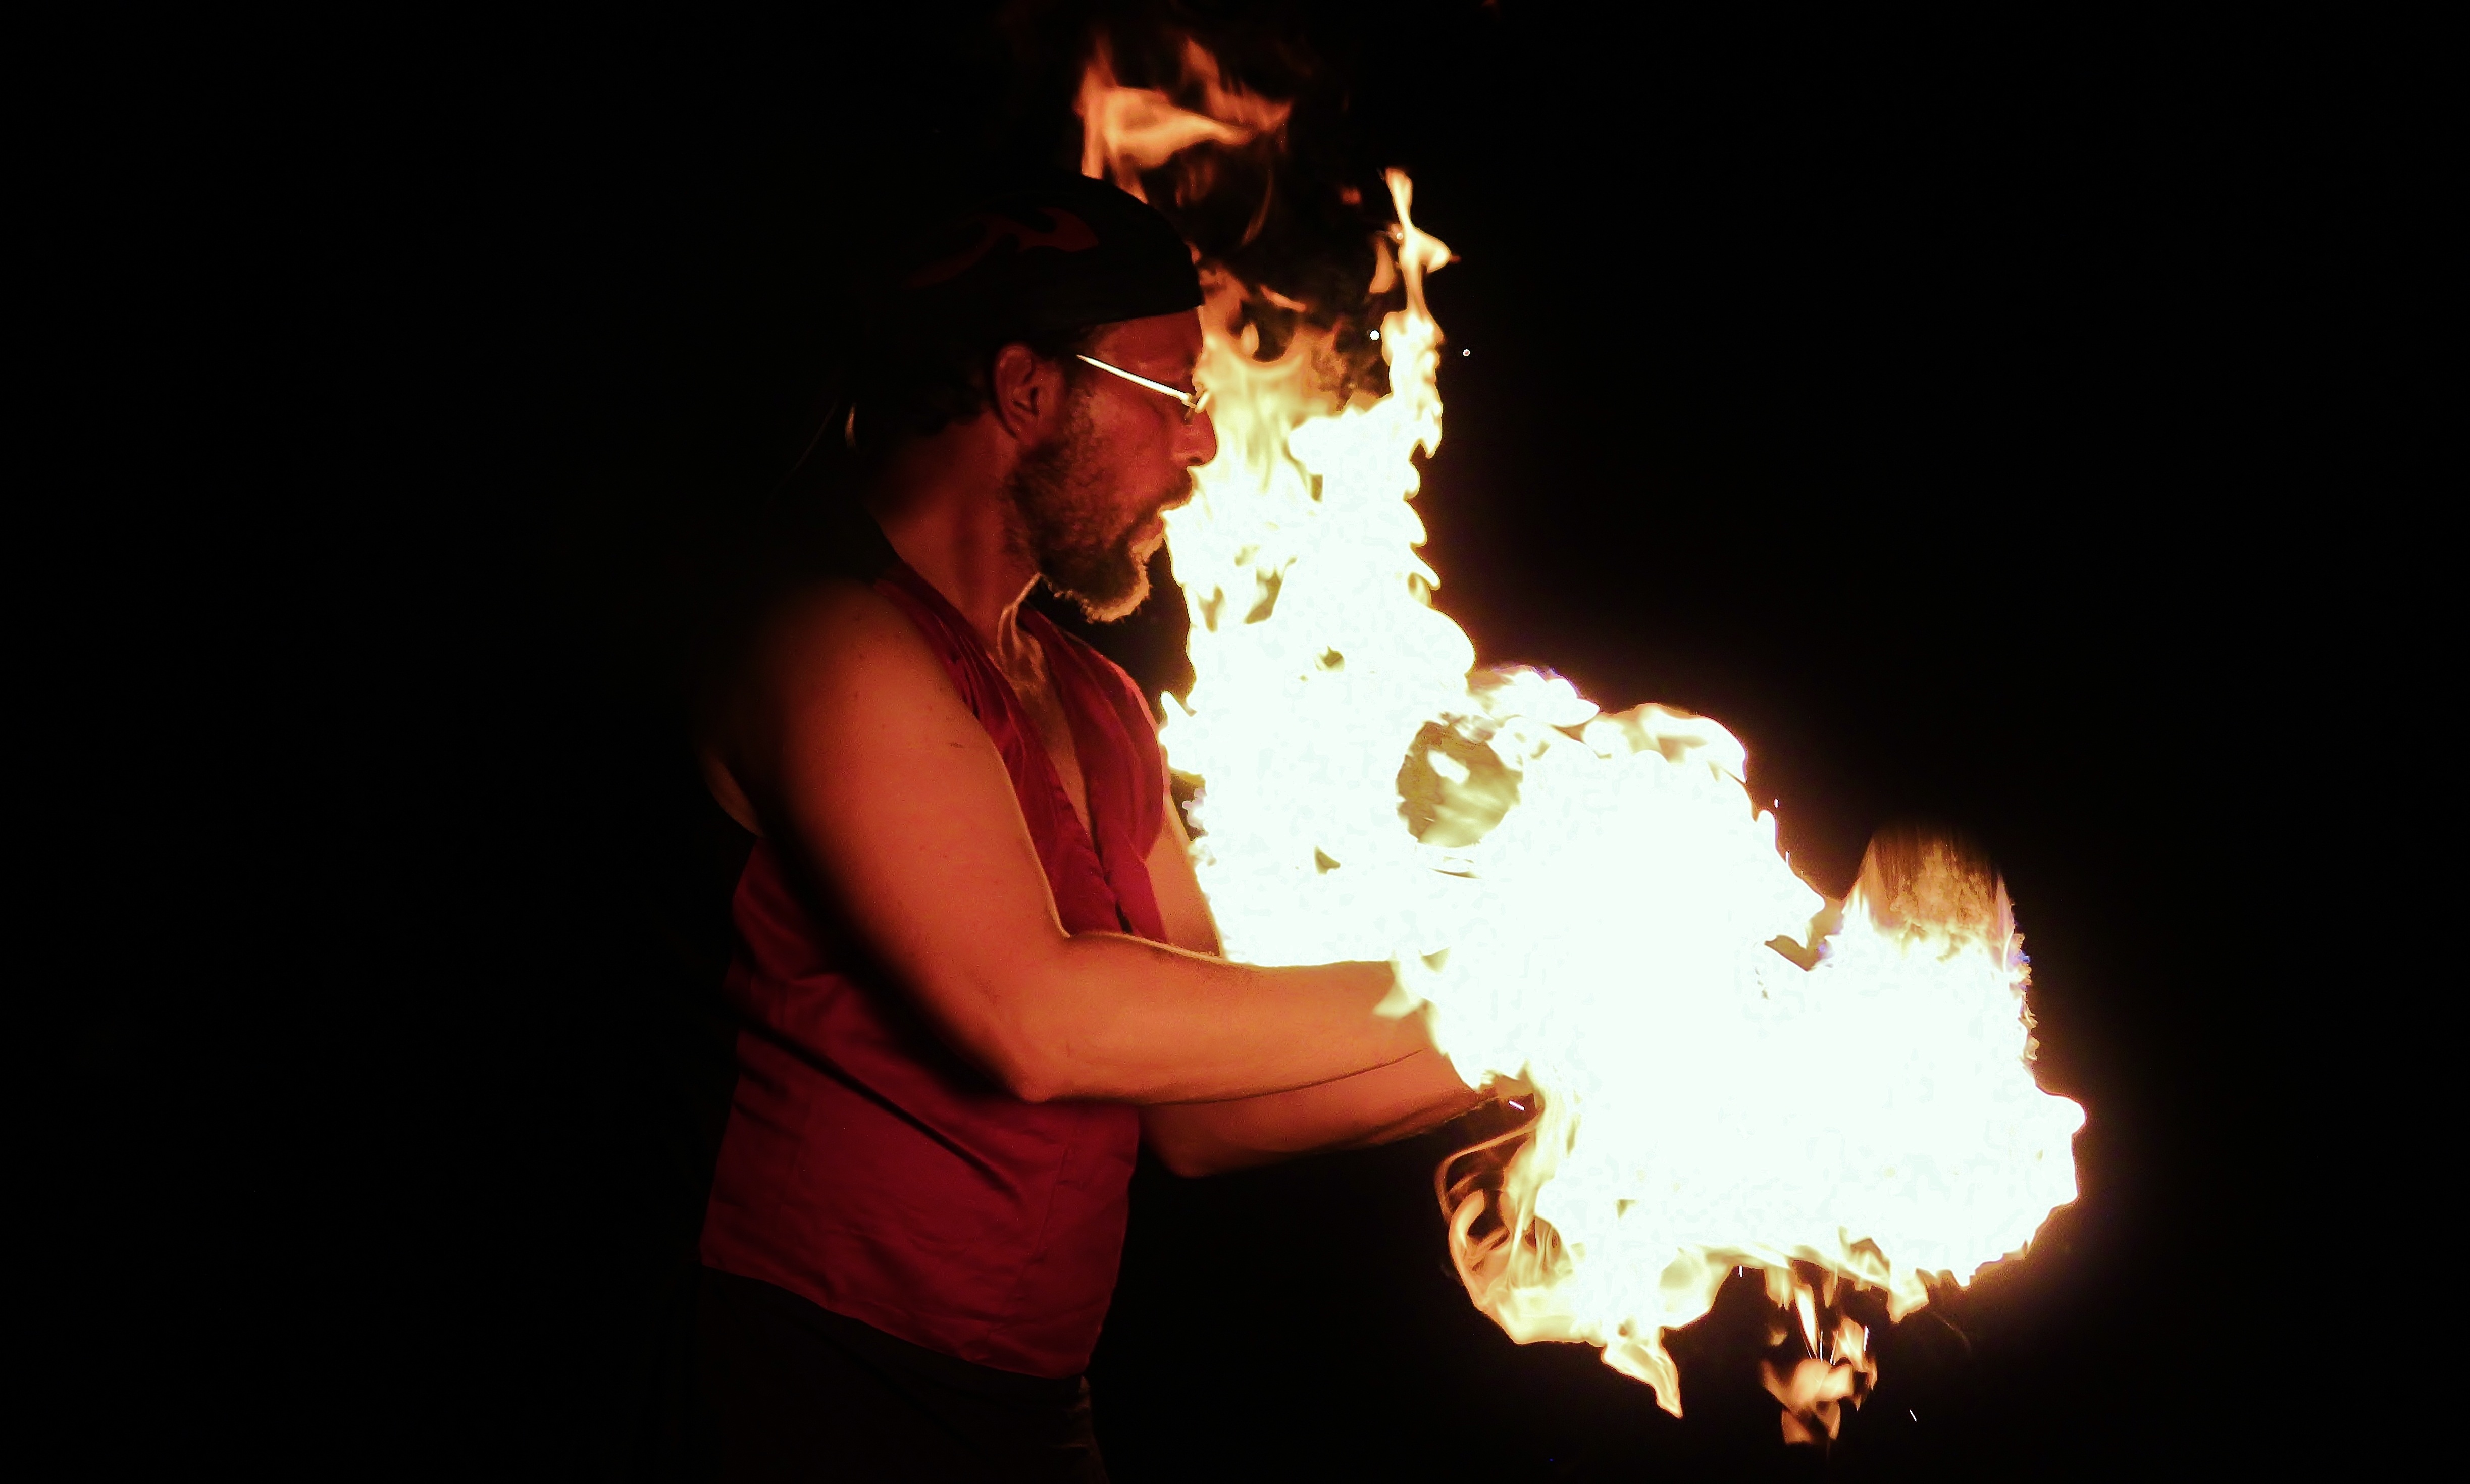 Fire show man free image download